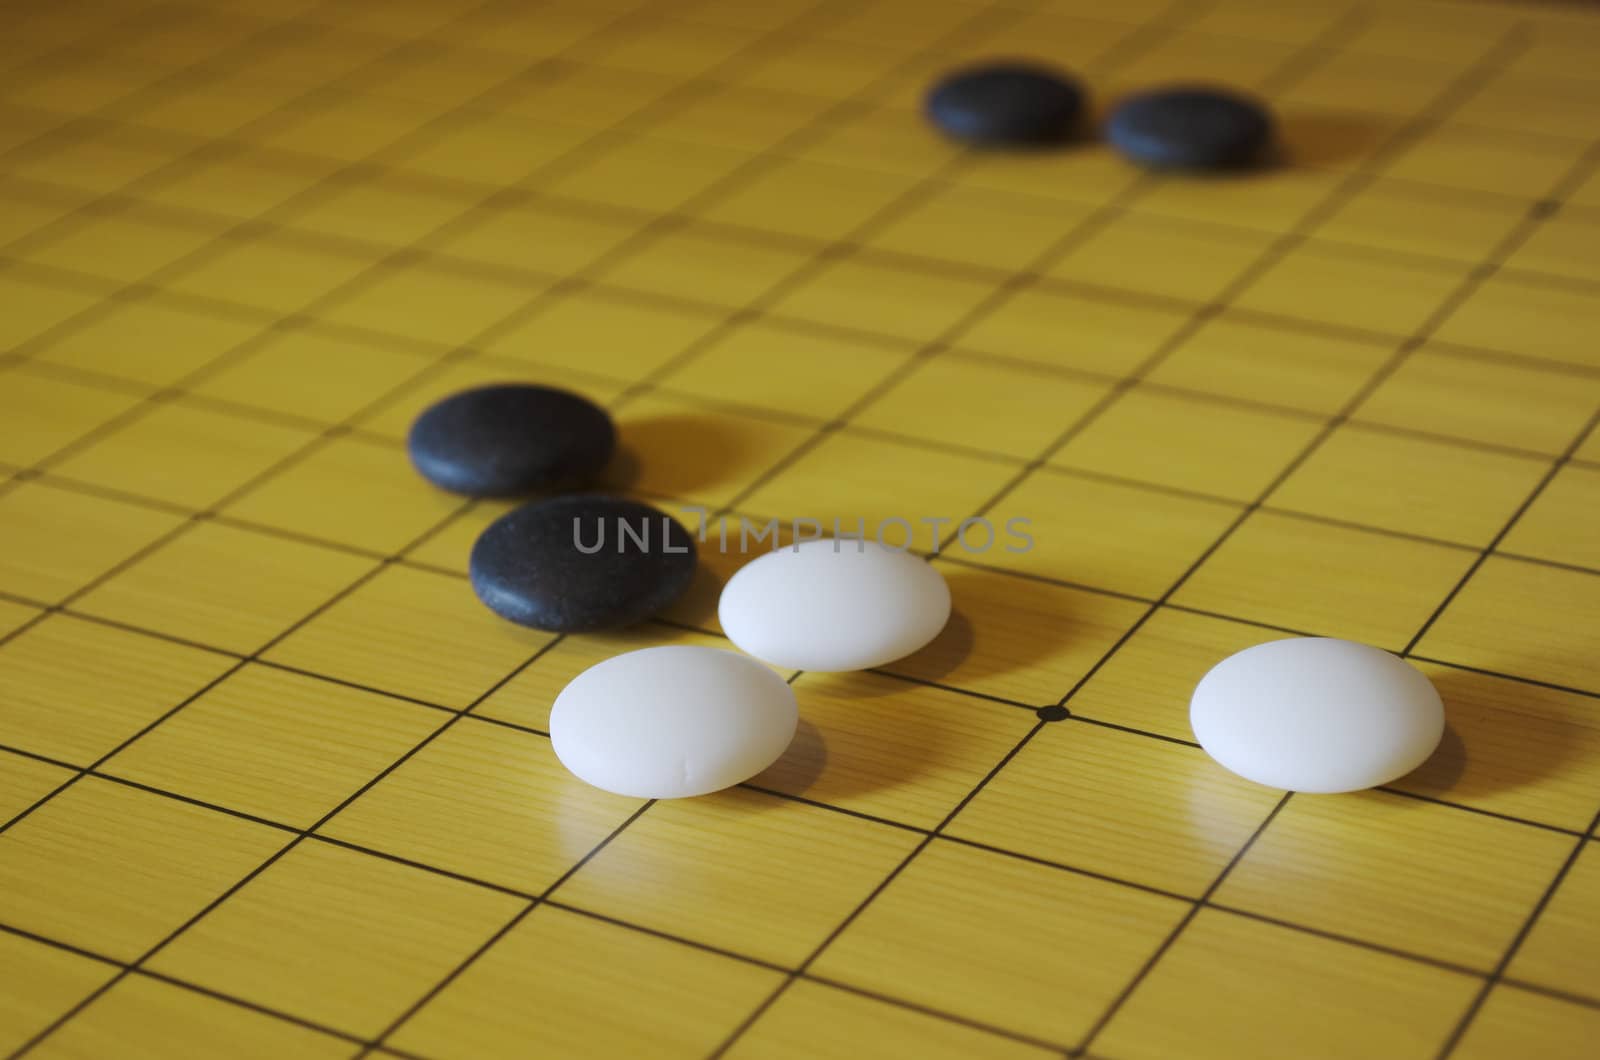 Picture taken during a game of go. Go is an ancient traditional Asian board game. Shallow depth of field.